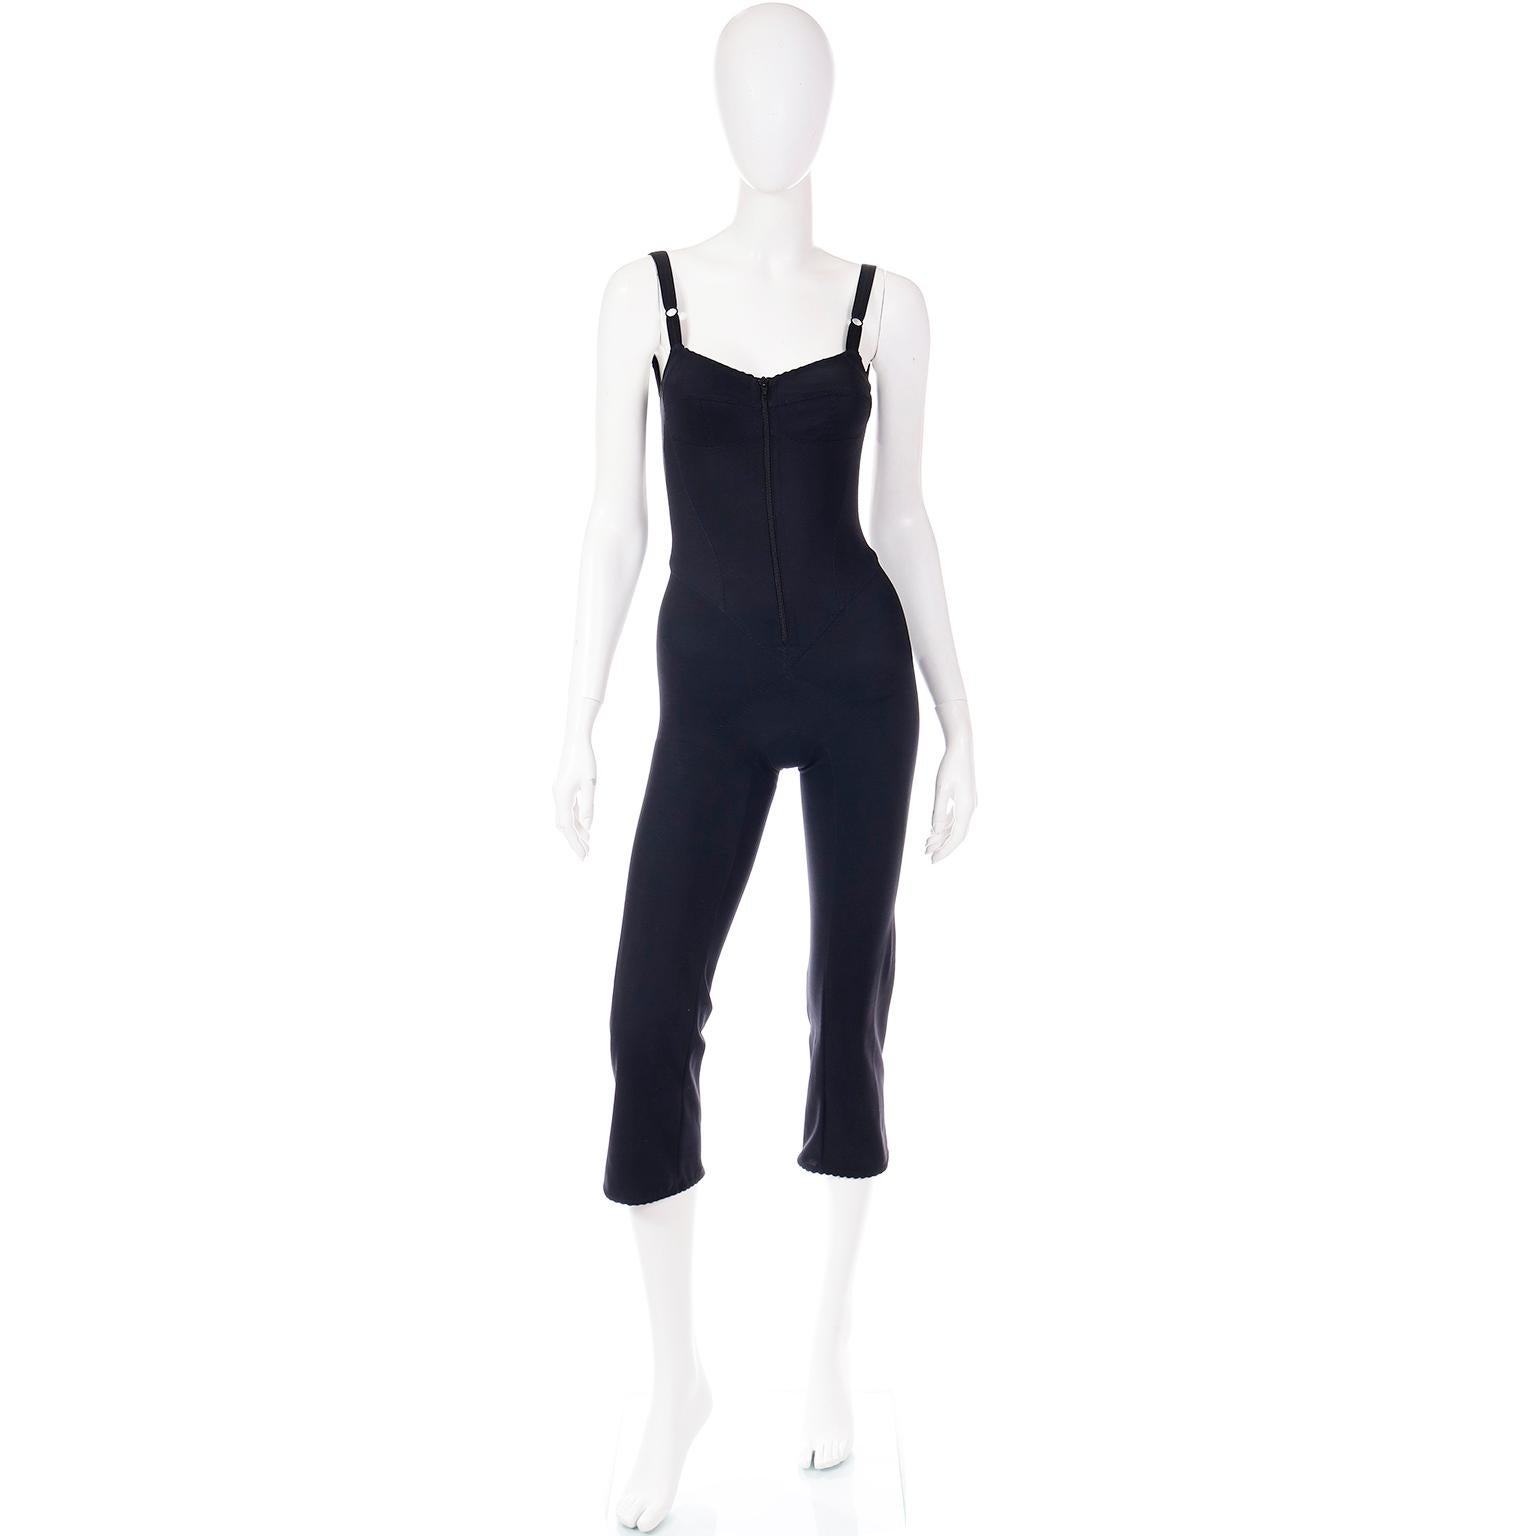 As with many of their pieces, this rare vintage Dolce & Gabbana jumpsuit was inspired by lingerie and the bodice is similar to a bustier with adjustable straps and defined bust.  This black stretch jumpsuit has a front center zipper and 